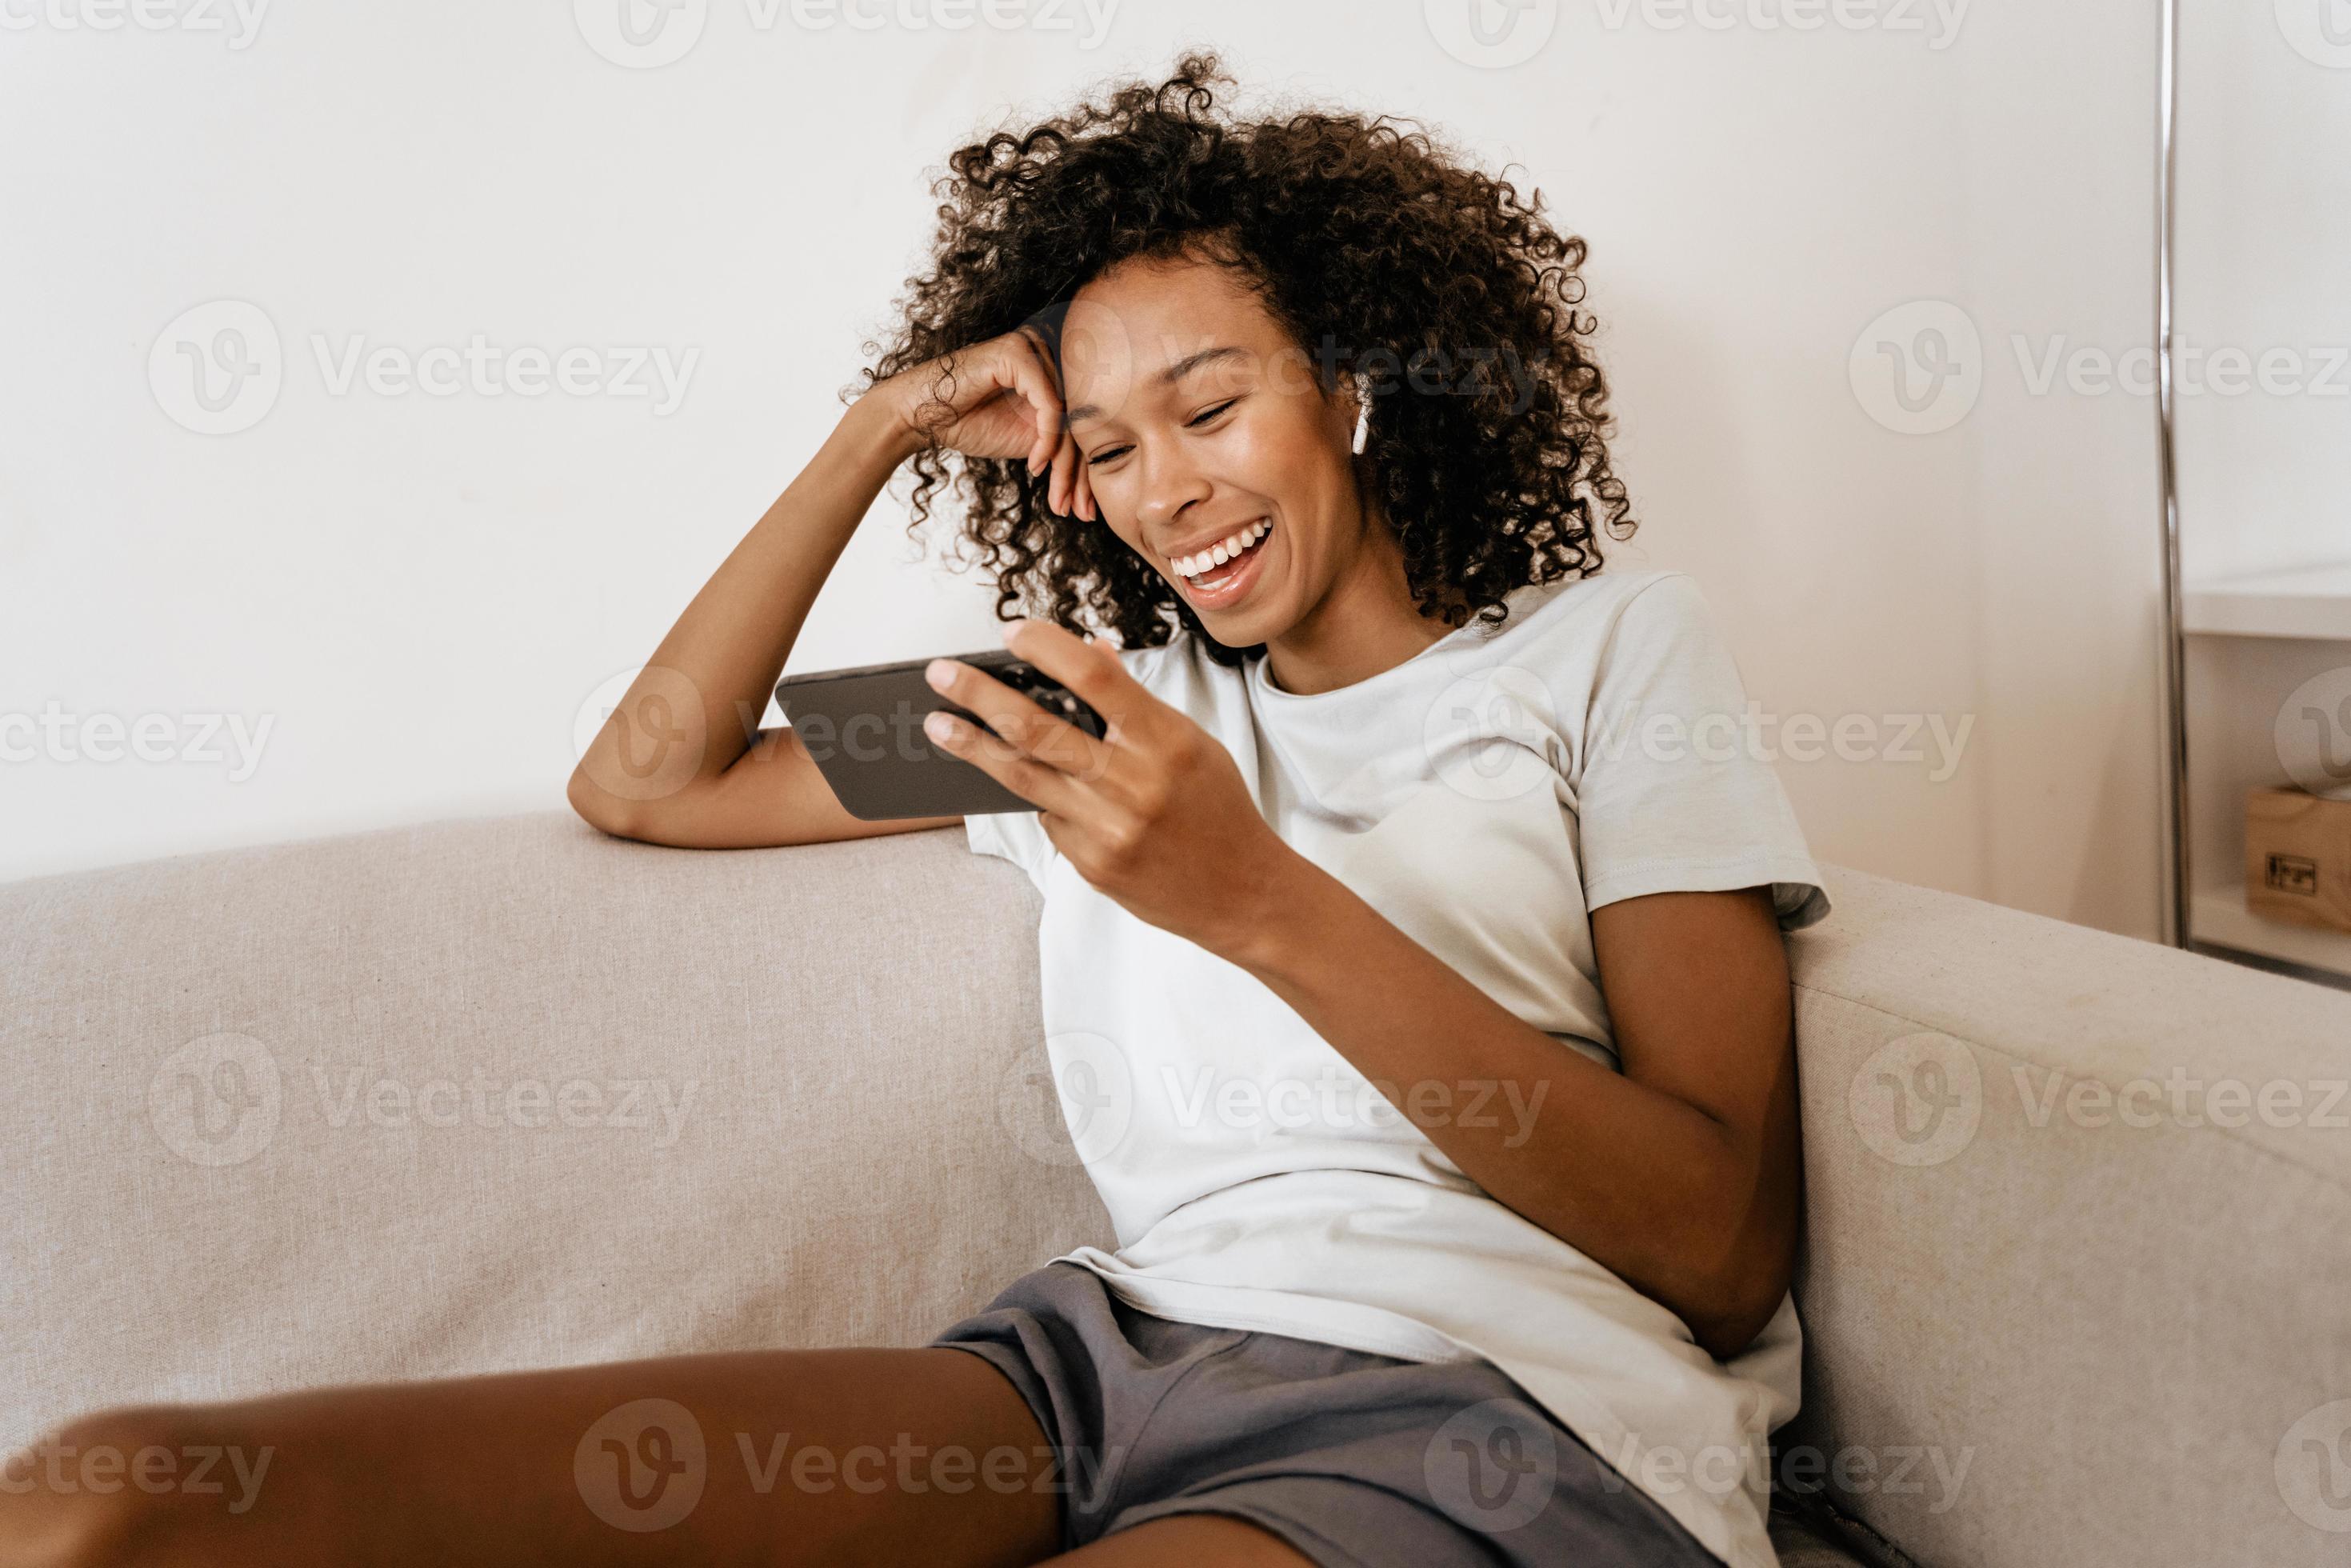 Black smiling young woman in earphones using mobile phone while laying on sofa photo